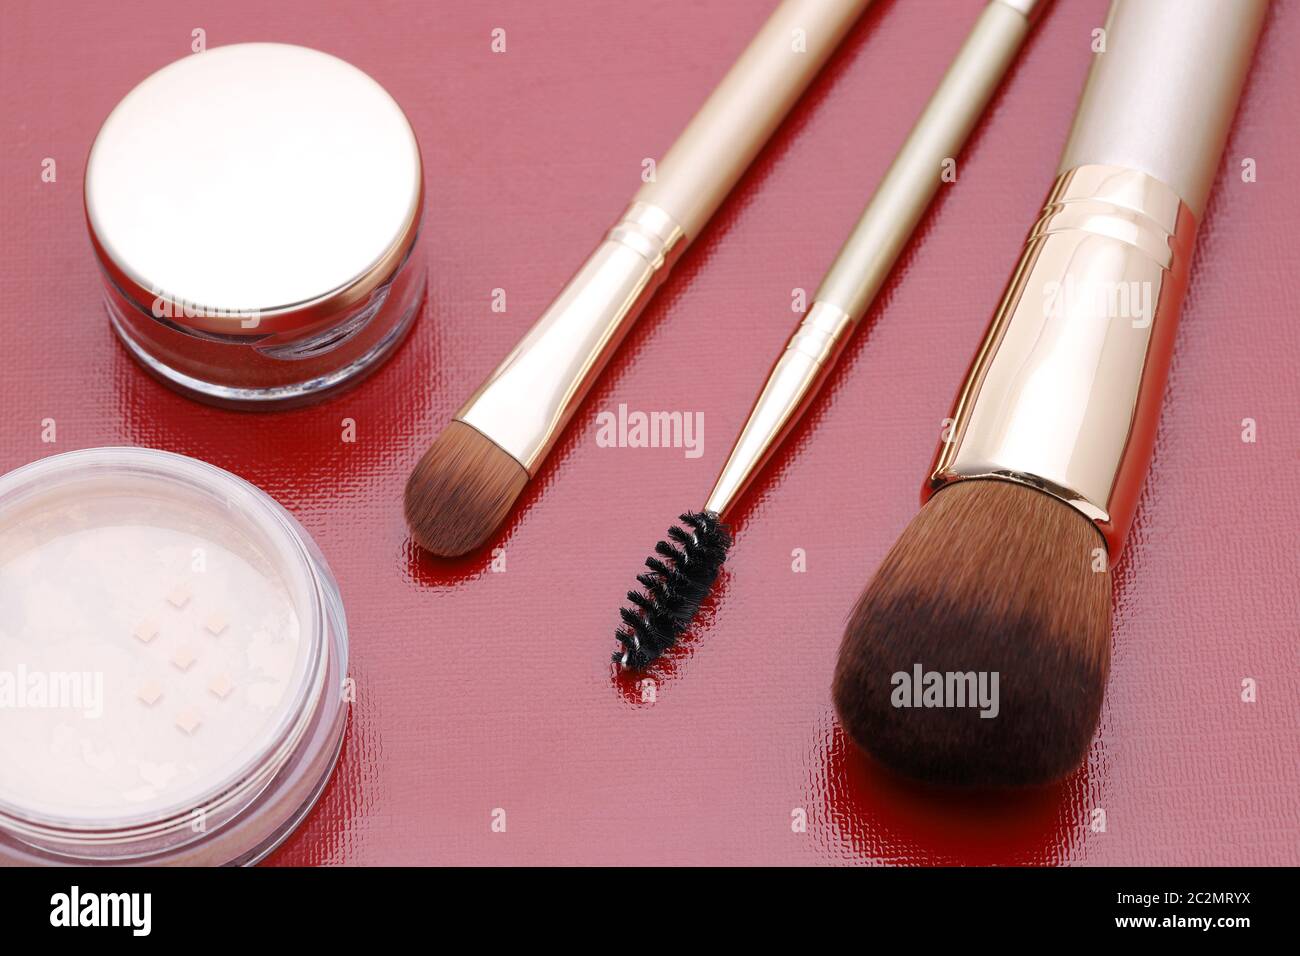 Set of makeup brush and face powder, Women accessories Stock Photo